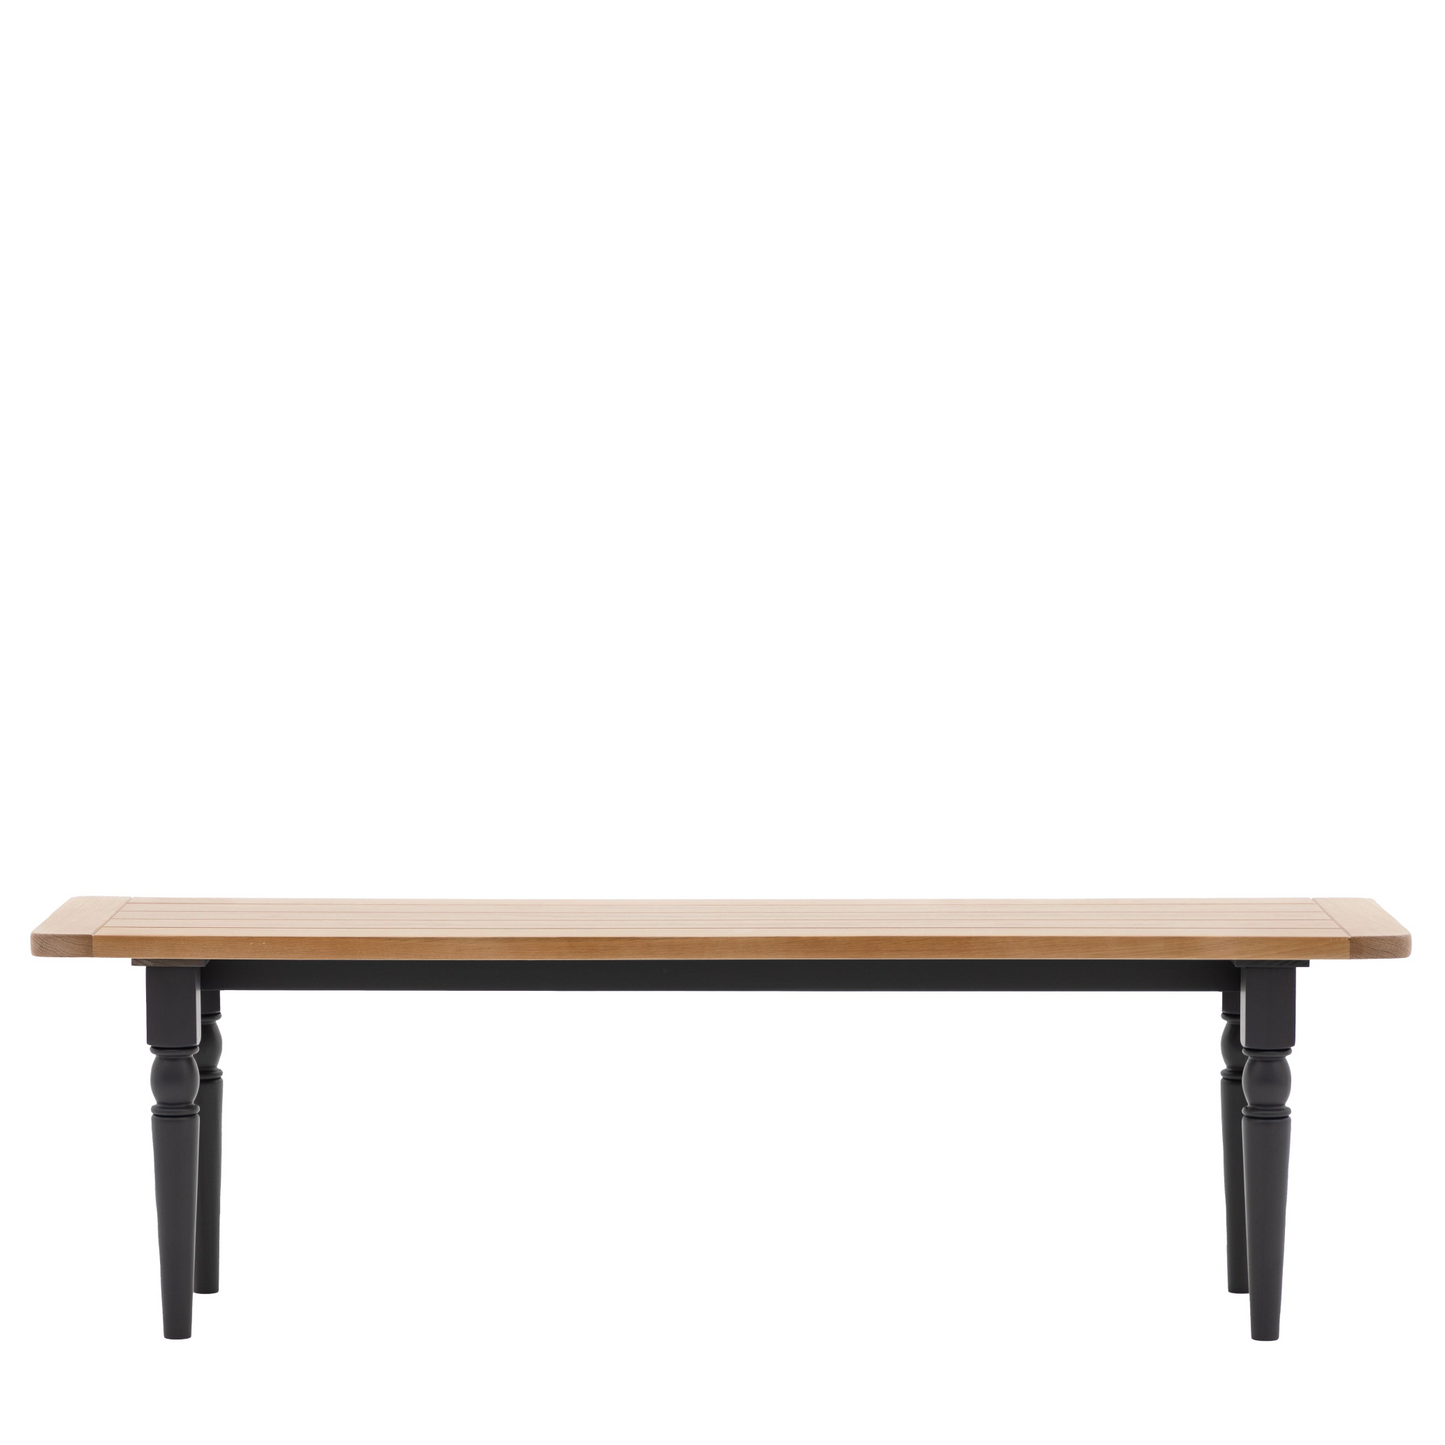 A Buckland Dining Bench in Meteor with black legs suitable for interior decor.